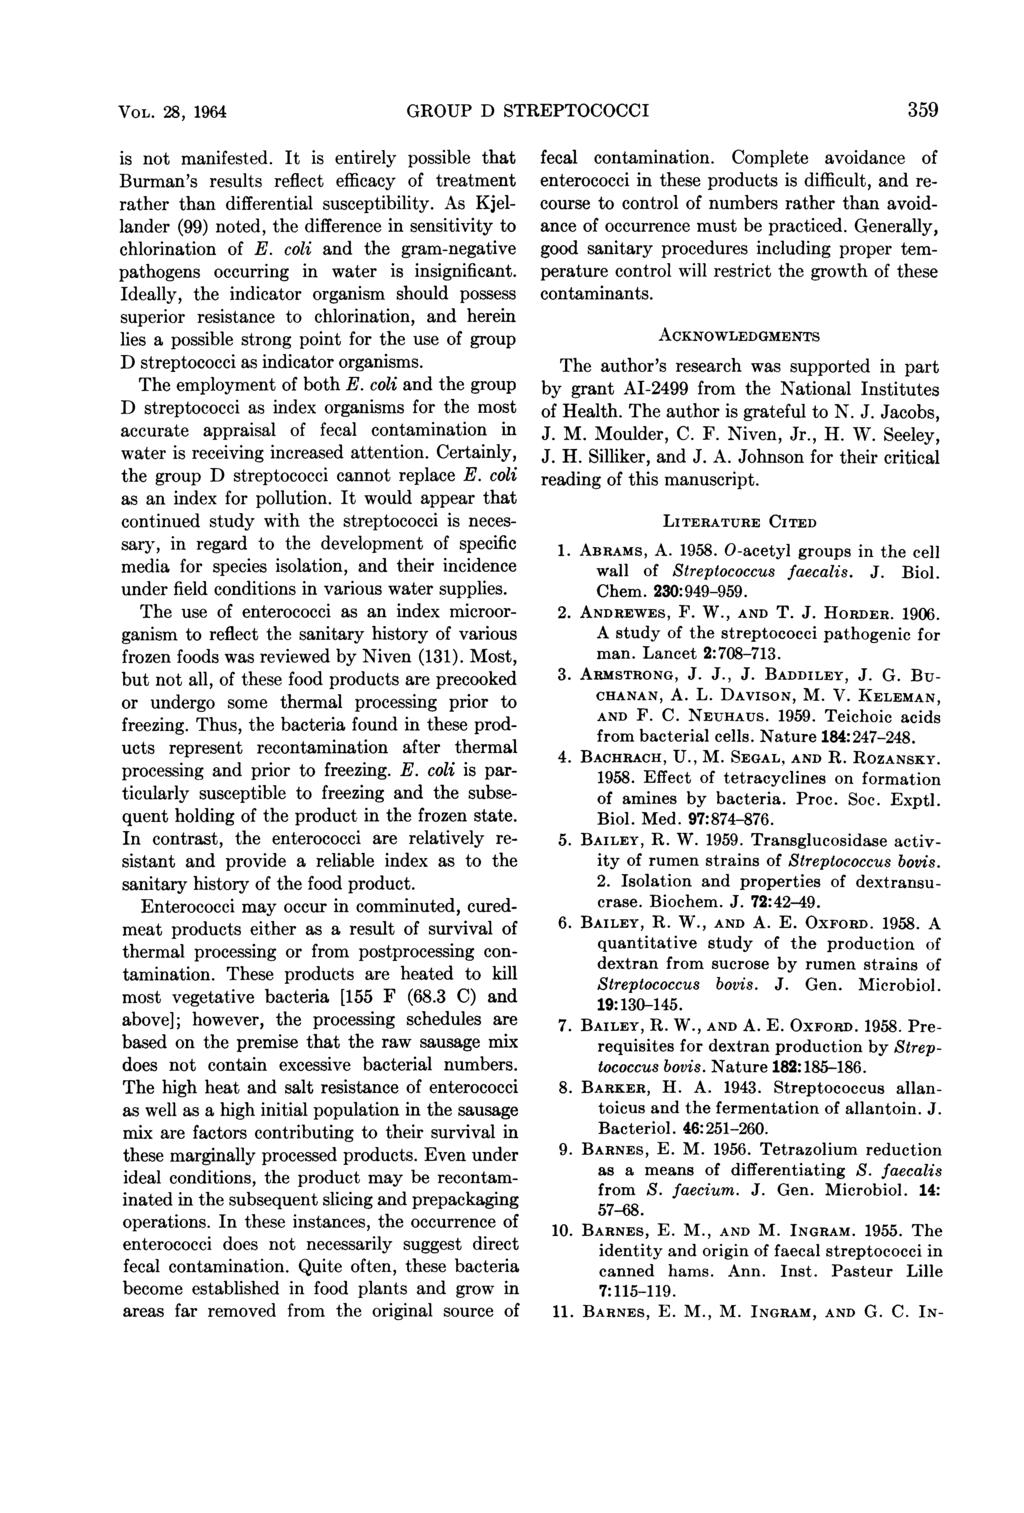 VOL. 28, 1964 GROUP D STREPTOCOCCI 359 is not manifested. It is entirely possible that Burman's results reflect efficacy of treatment rather than differential susceptibility.